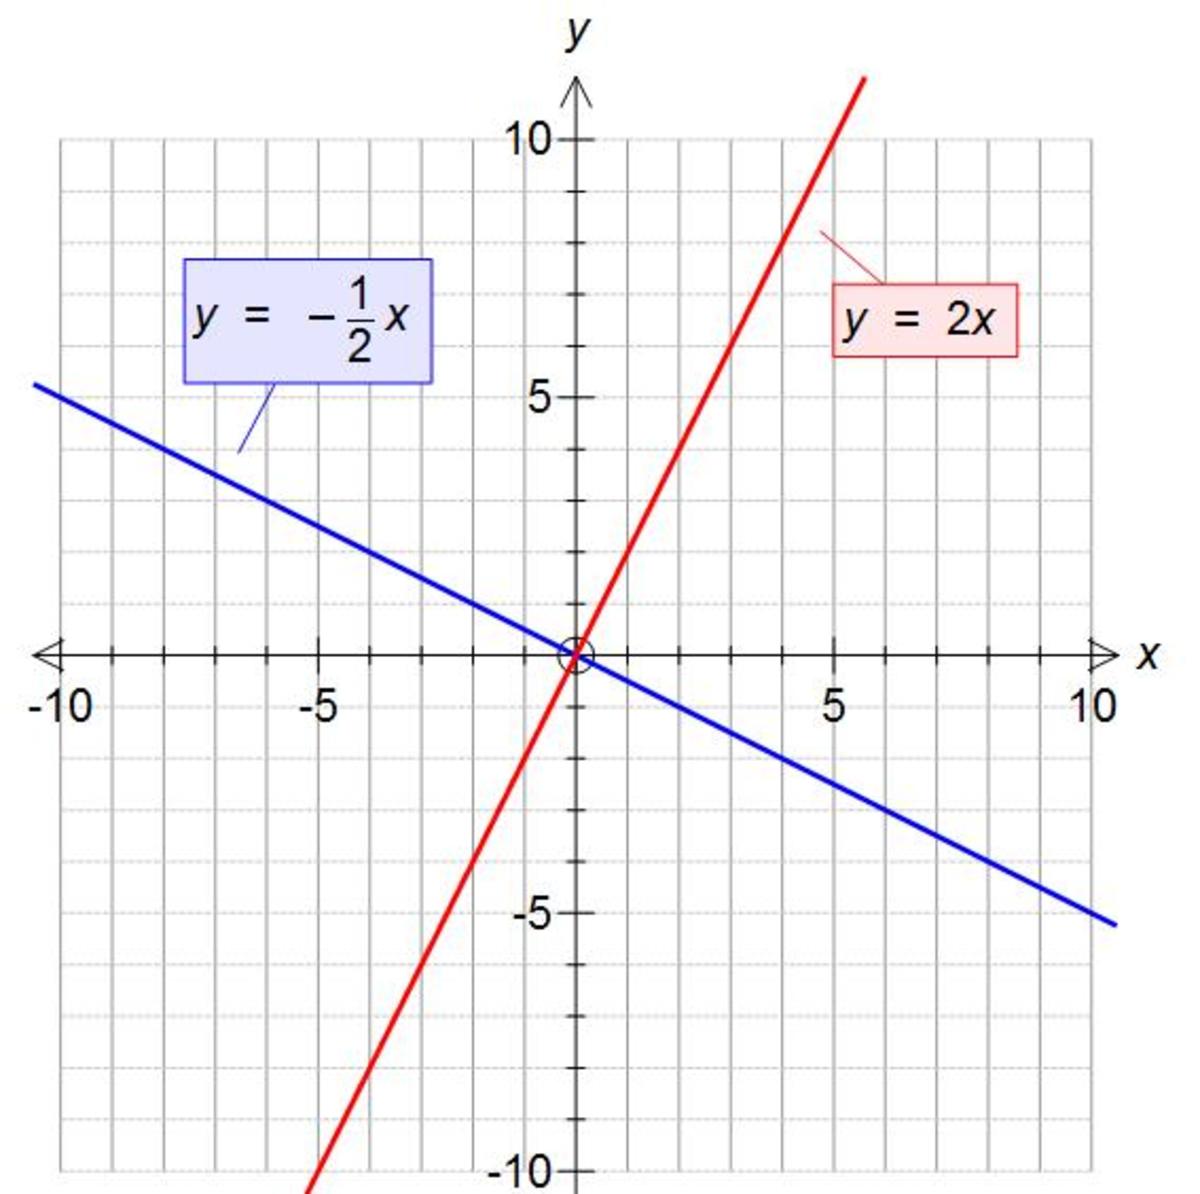 Perpendicular gradients. Calculating the perpendicular gradient of a linear graph.